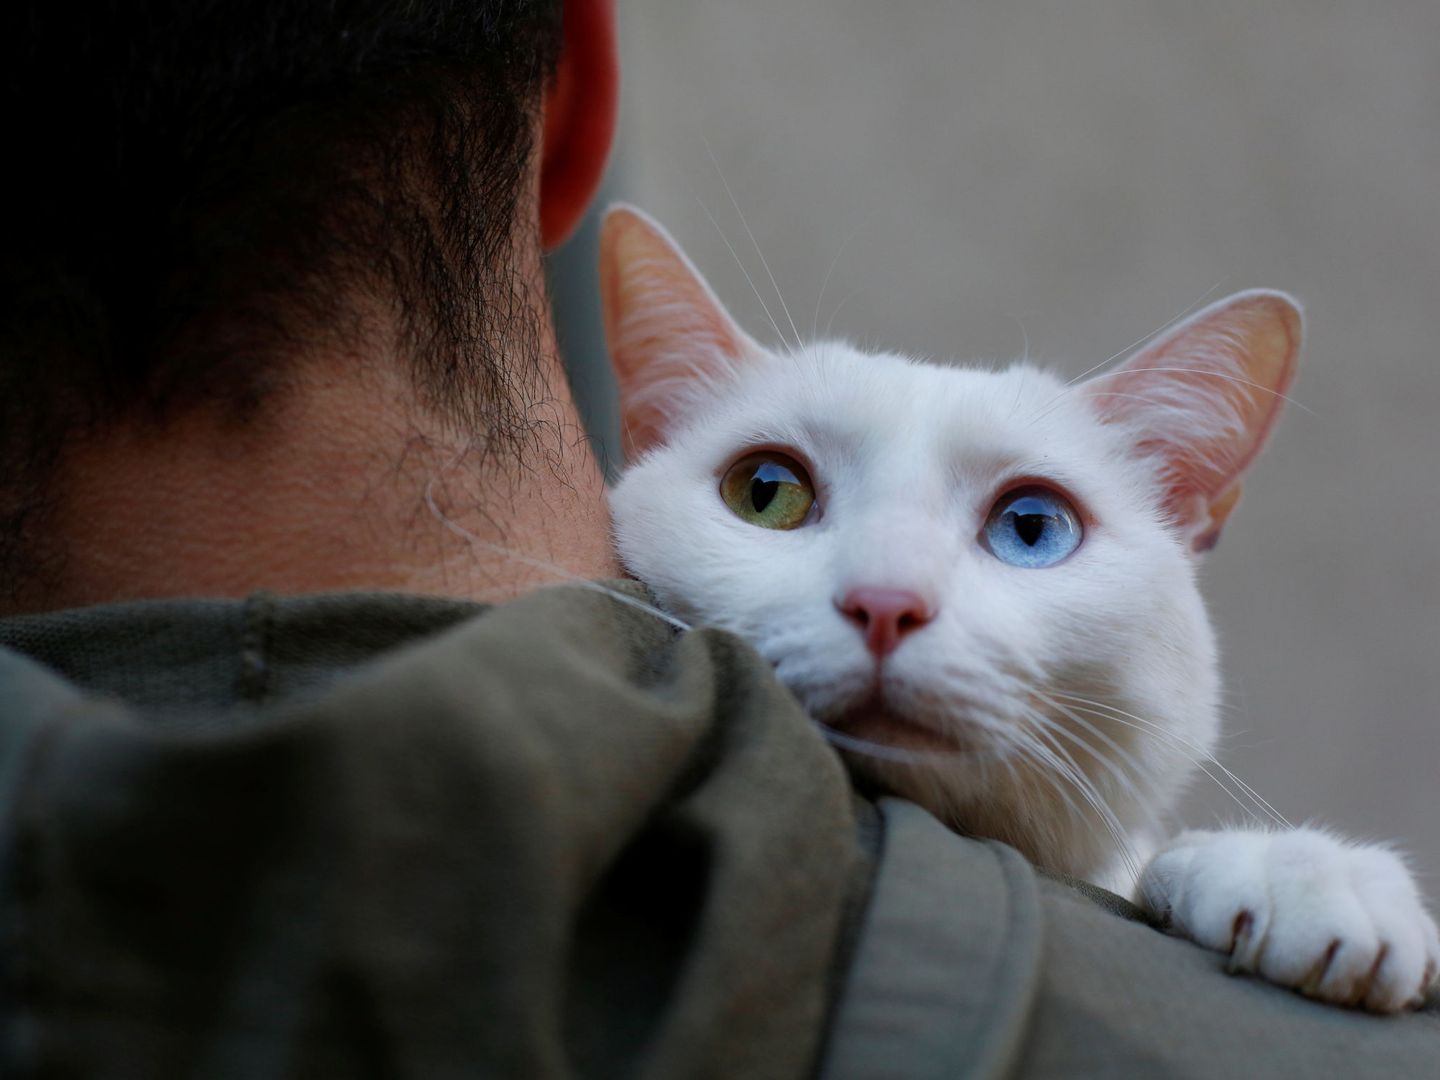 Two-year-old cat 'Onis' waits to be blessed by a priest outside San Anton Church in Madrid, Spain, January 17, 2018. Hundreds of pet owners bring their animals to be blessed every year on the day of Saint Anthony, Spain's saint patron of animals. REUTERS Susana Vera